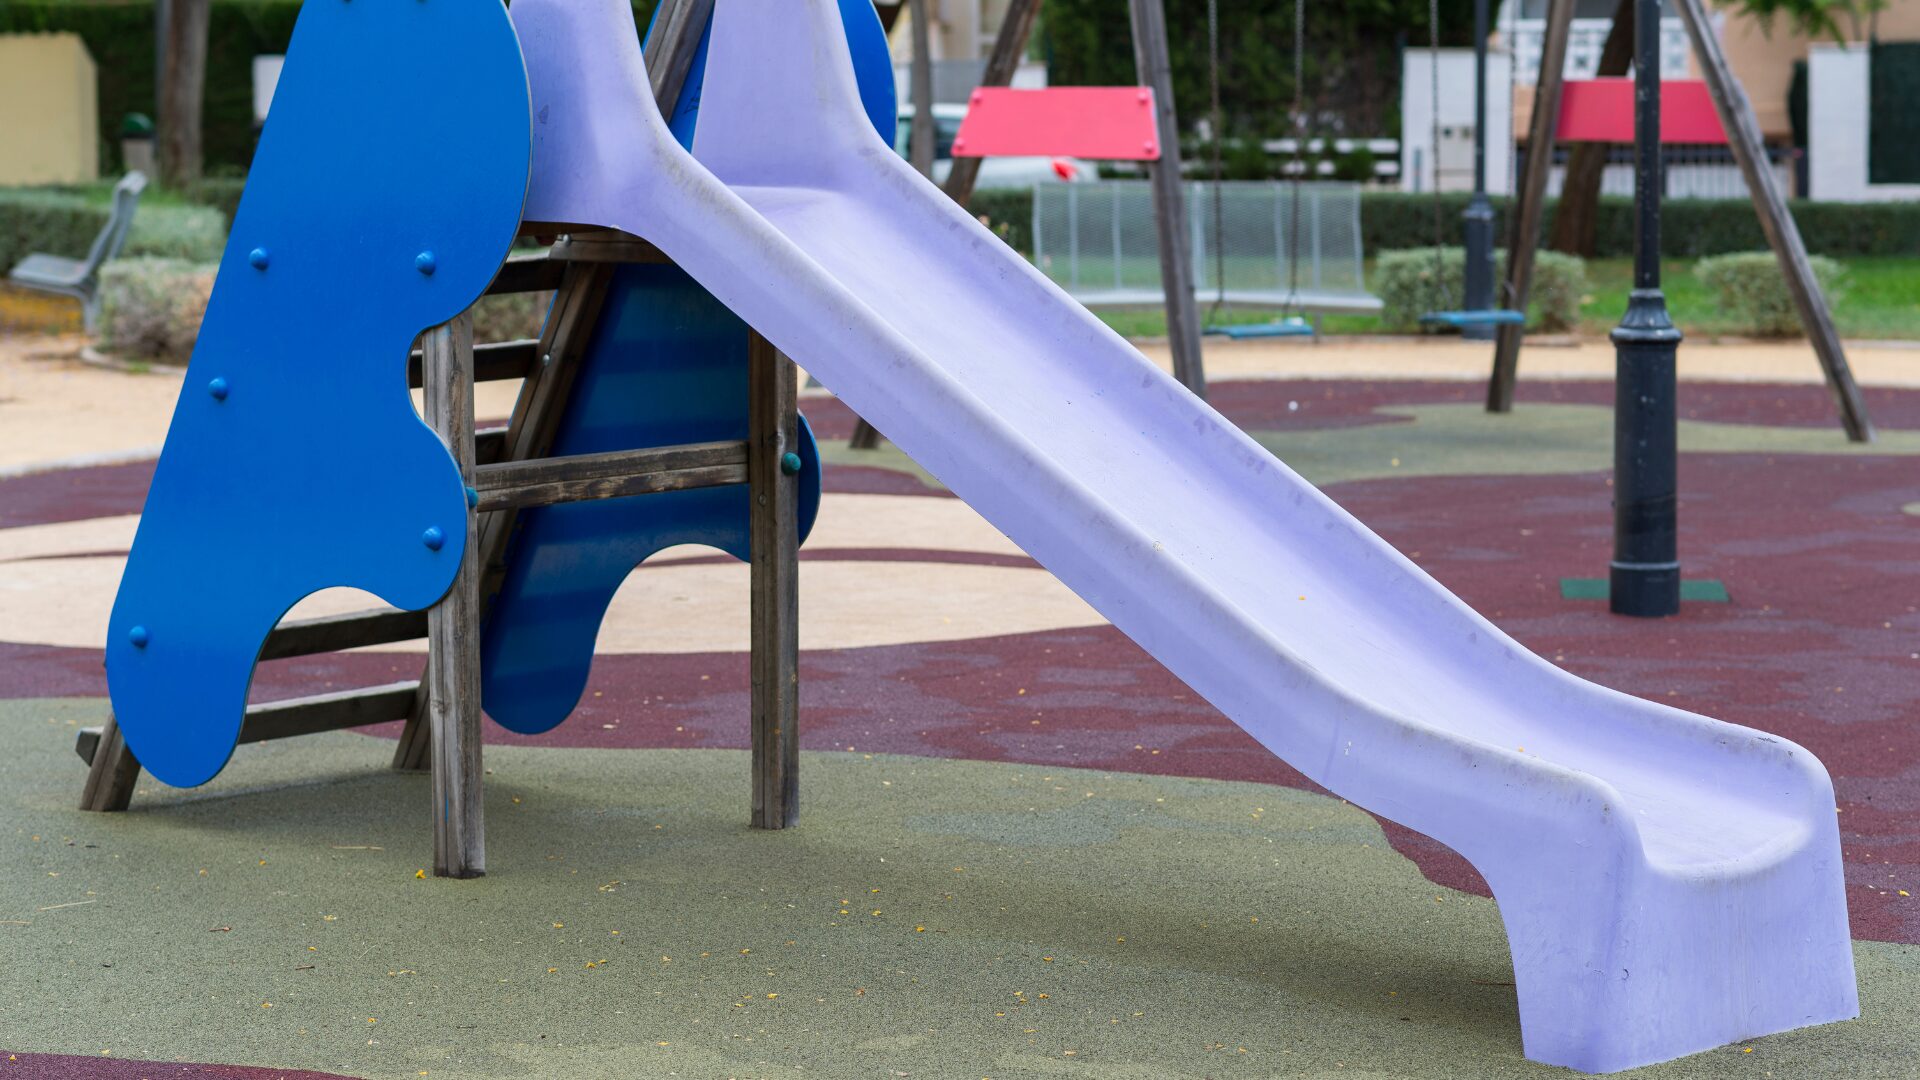 safety aspects, childcare, playground